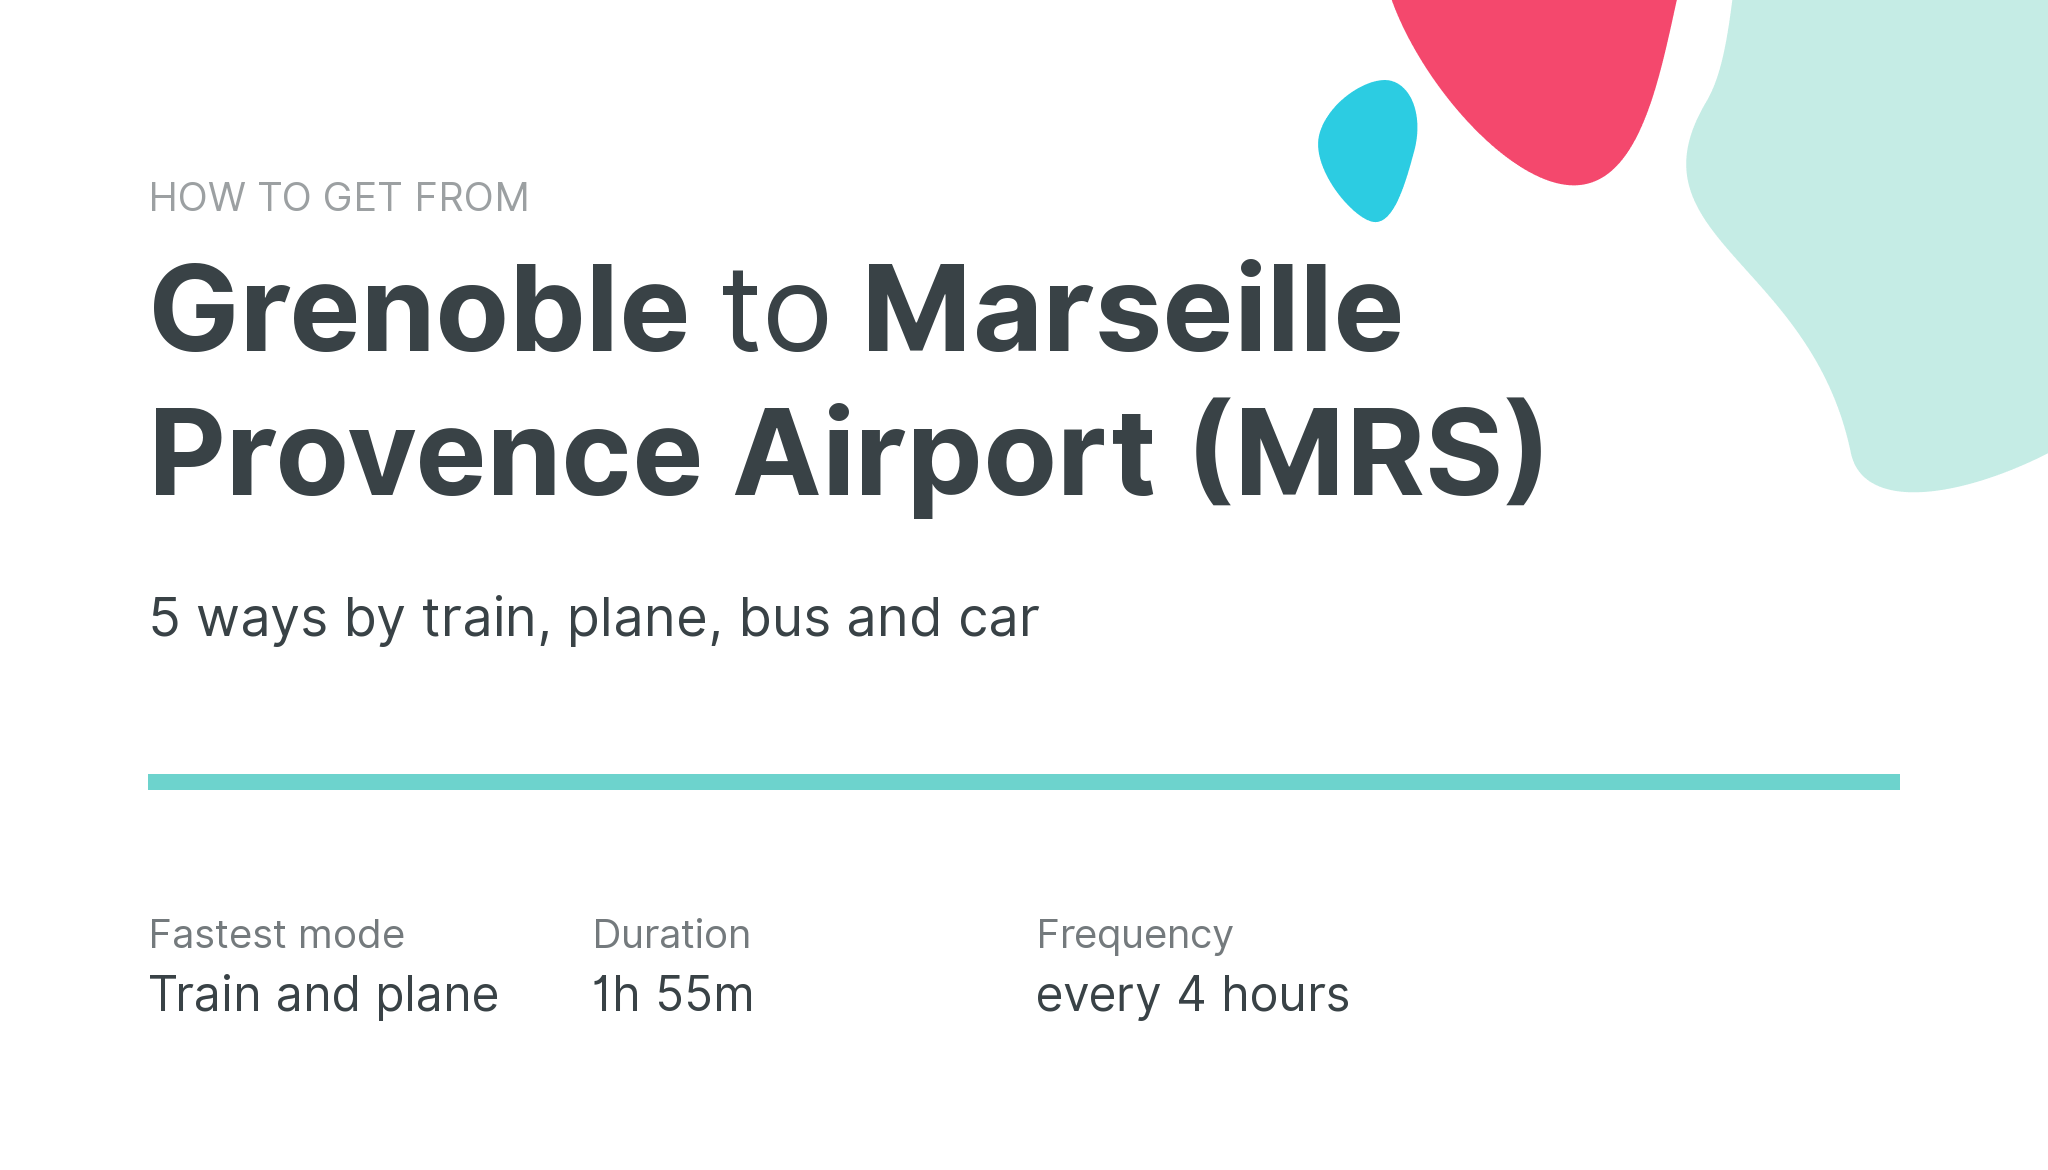 How do I get from Grenoble to Marseille Provence Airport (MRS)